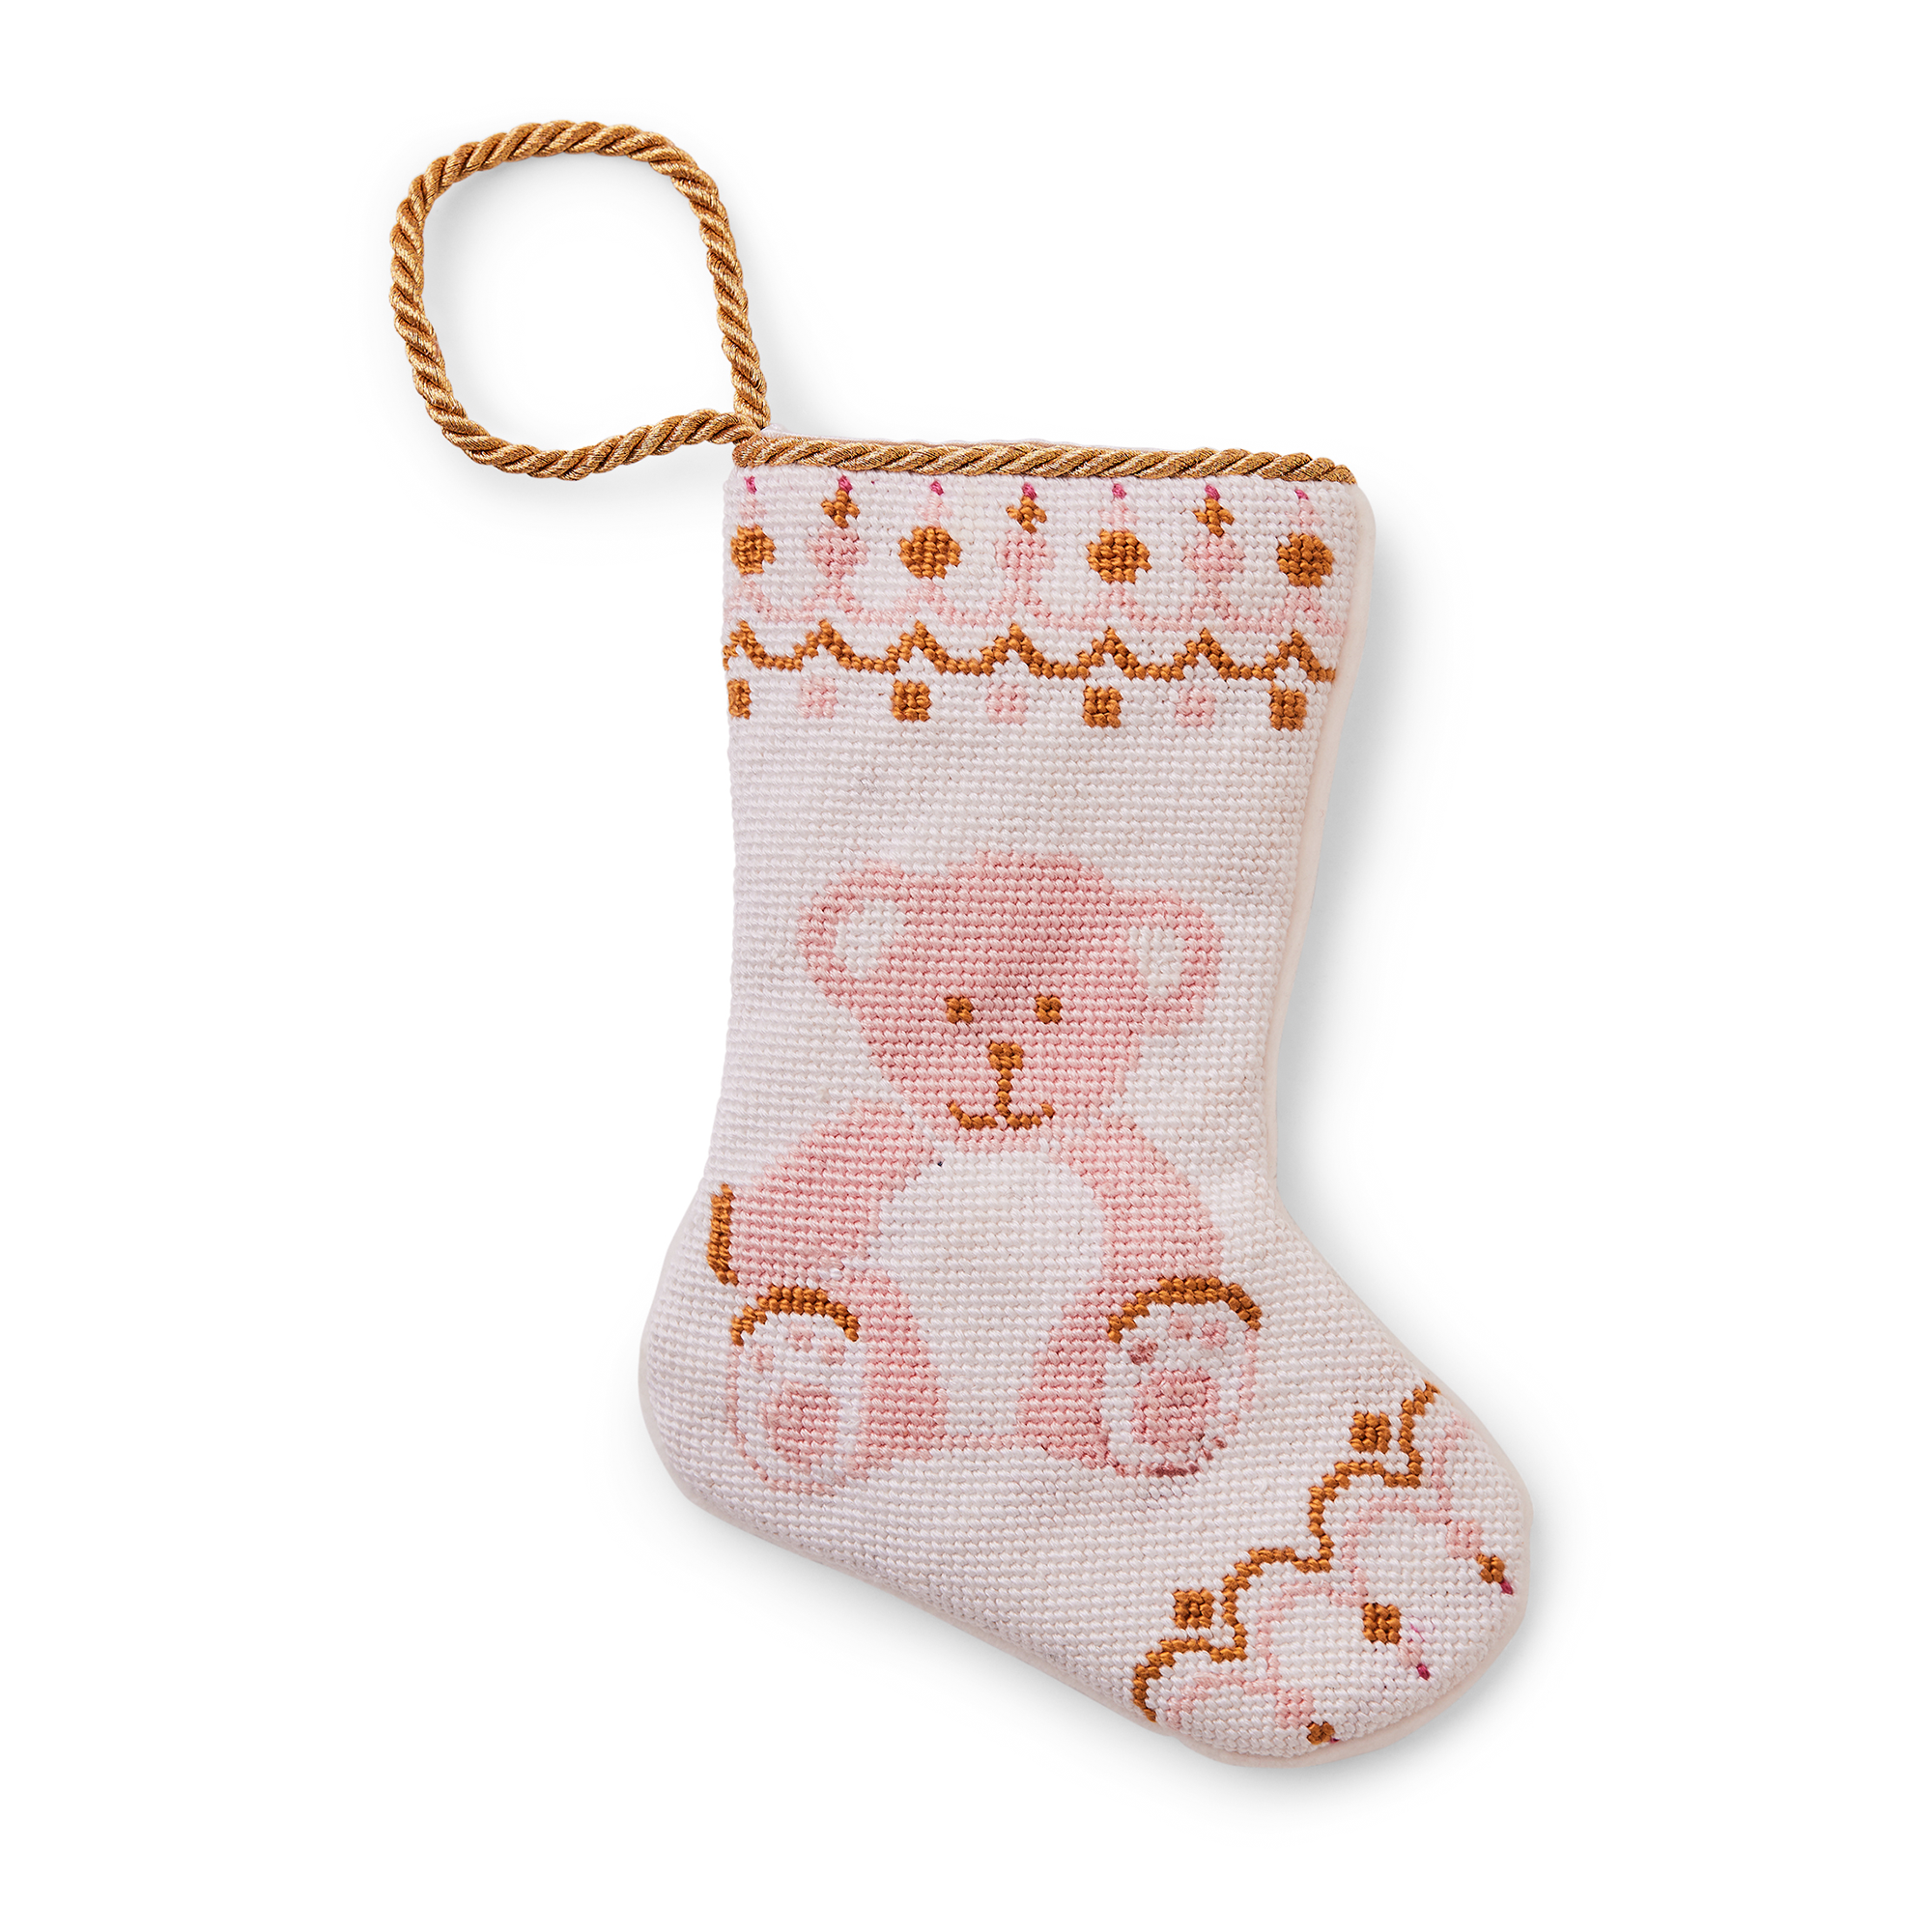 A charming Christmas stocking, Pink Bear enjoying a festive holiday scene. Perfect as tree ornaments, place settings, or hanging by the fireplace.